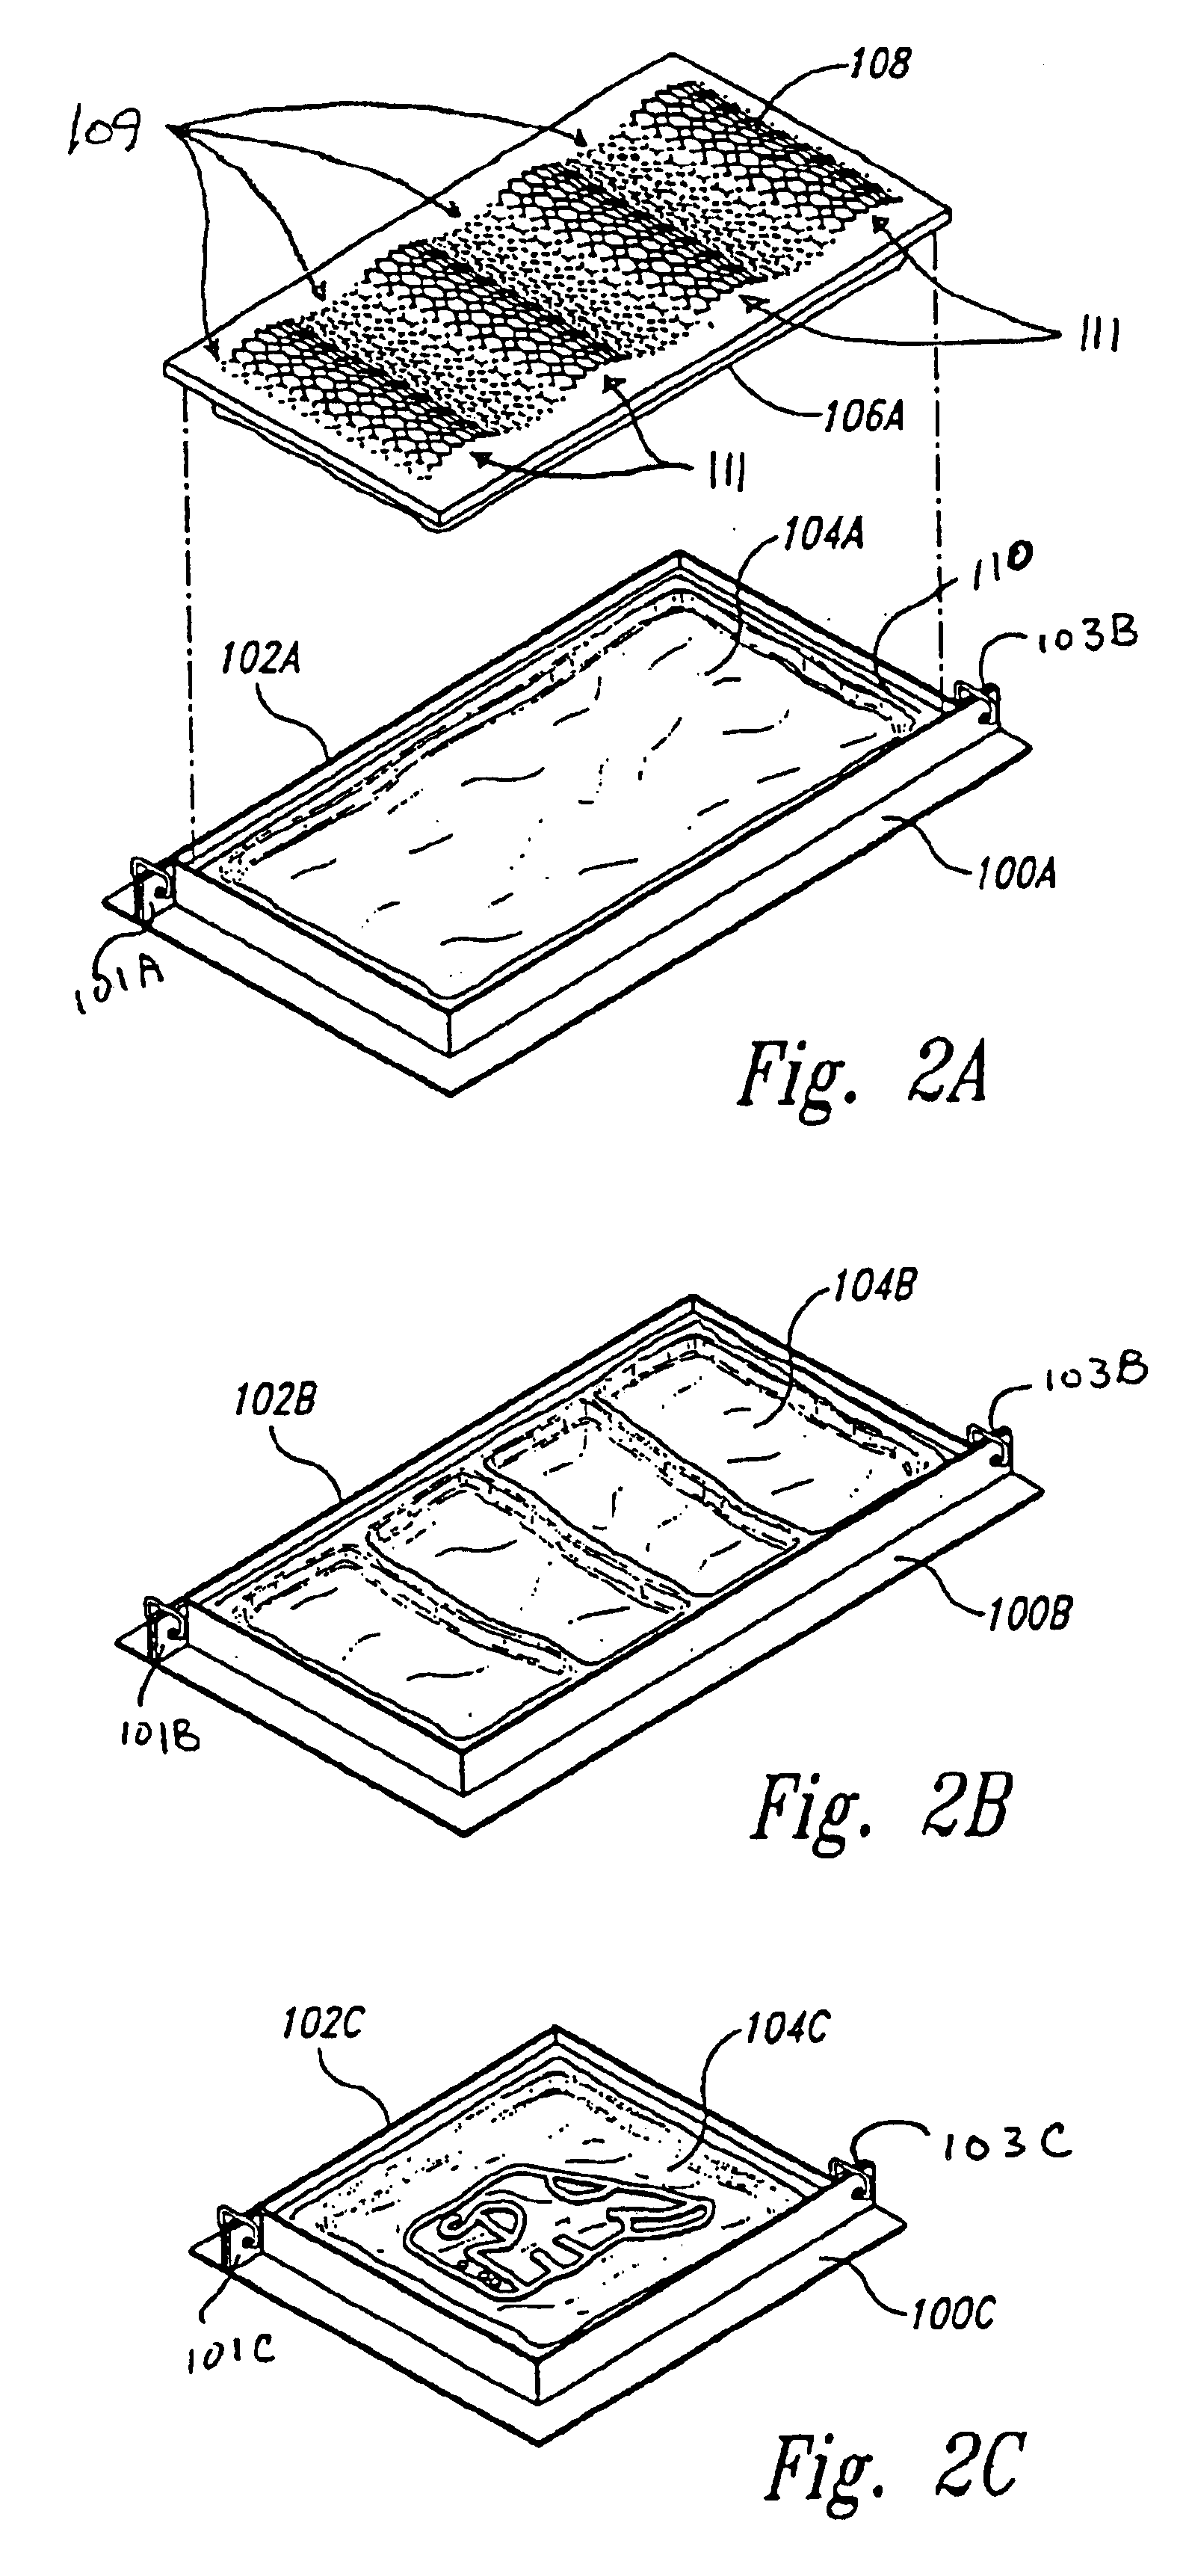 Method and apparatus for making foam blocks and for building structures therewith